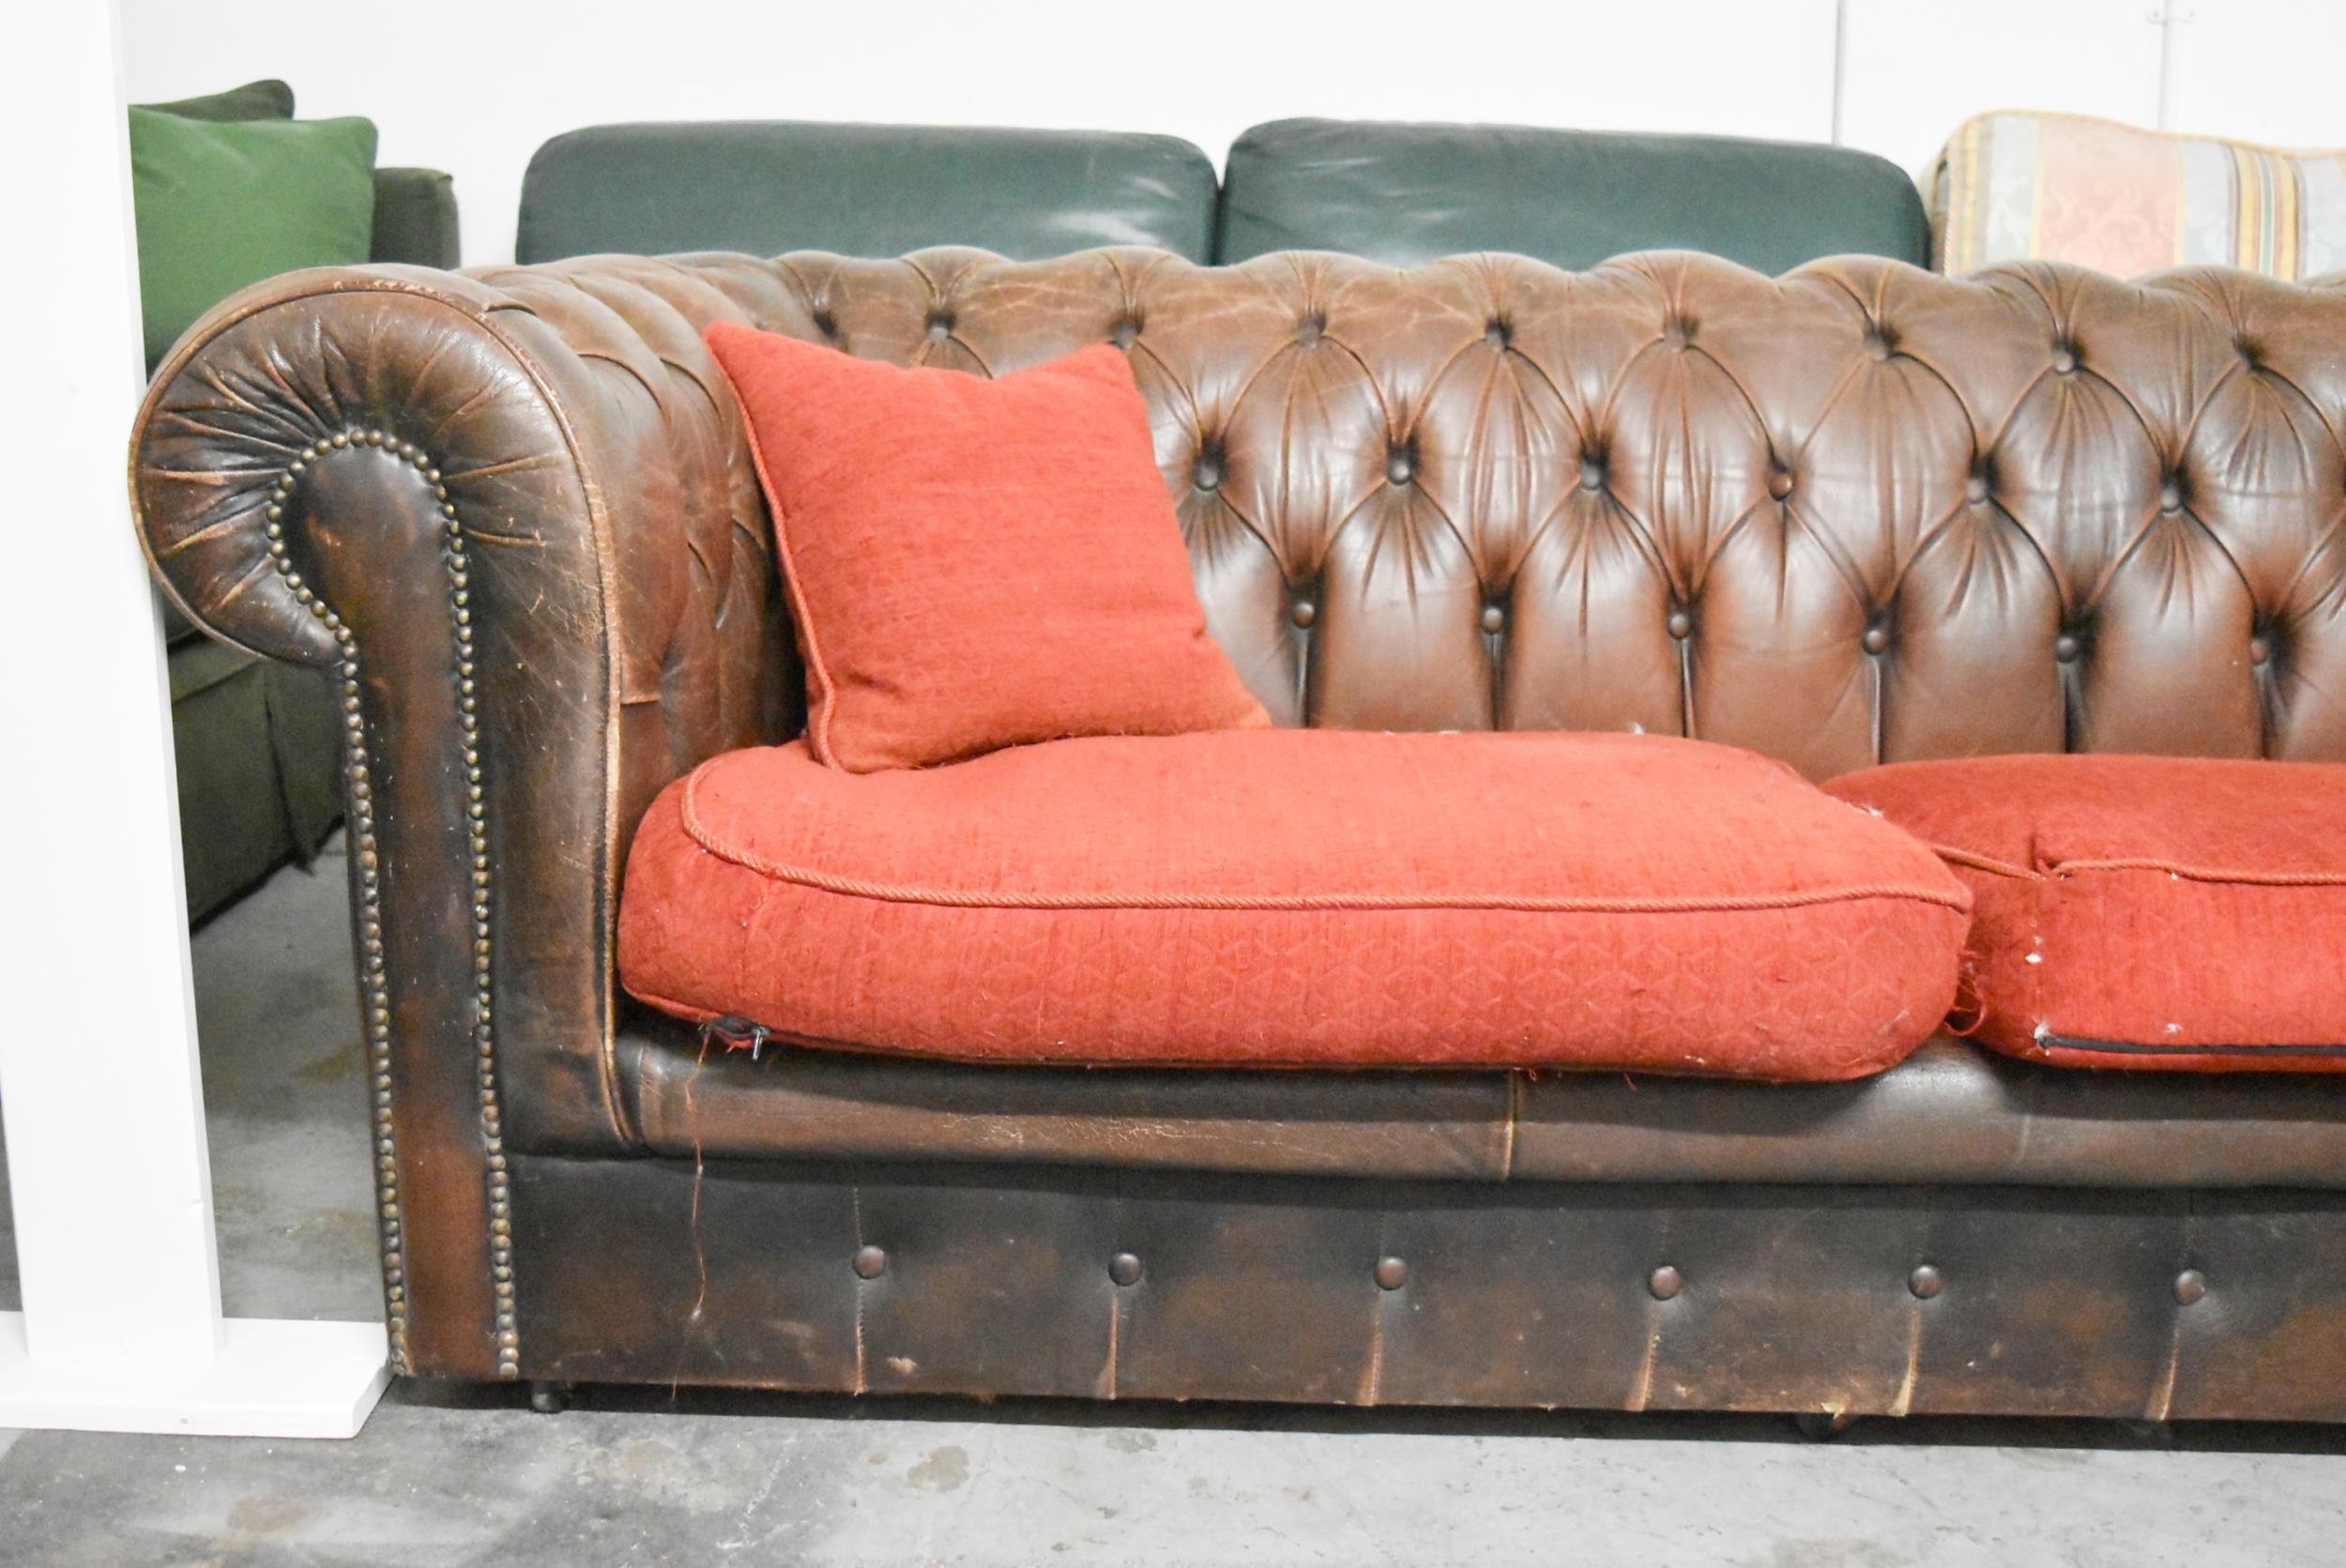 A Chesterfield two seater sofa in brown leather deep buttoned upholstery. H.70 x W.200 x D.82cm - Image 2 of 6